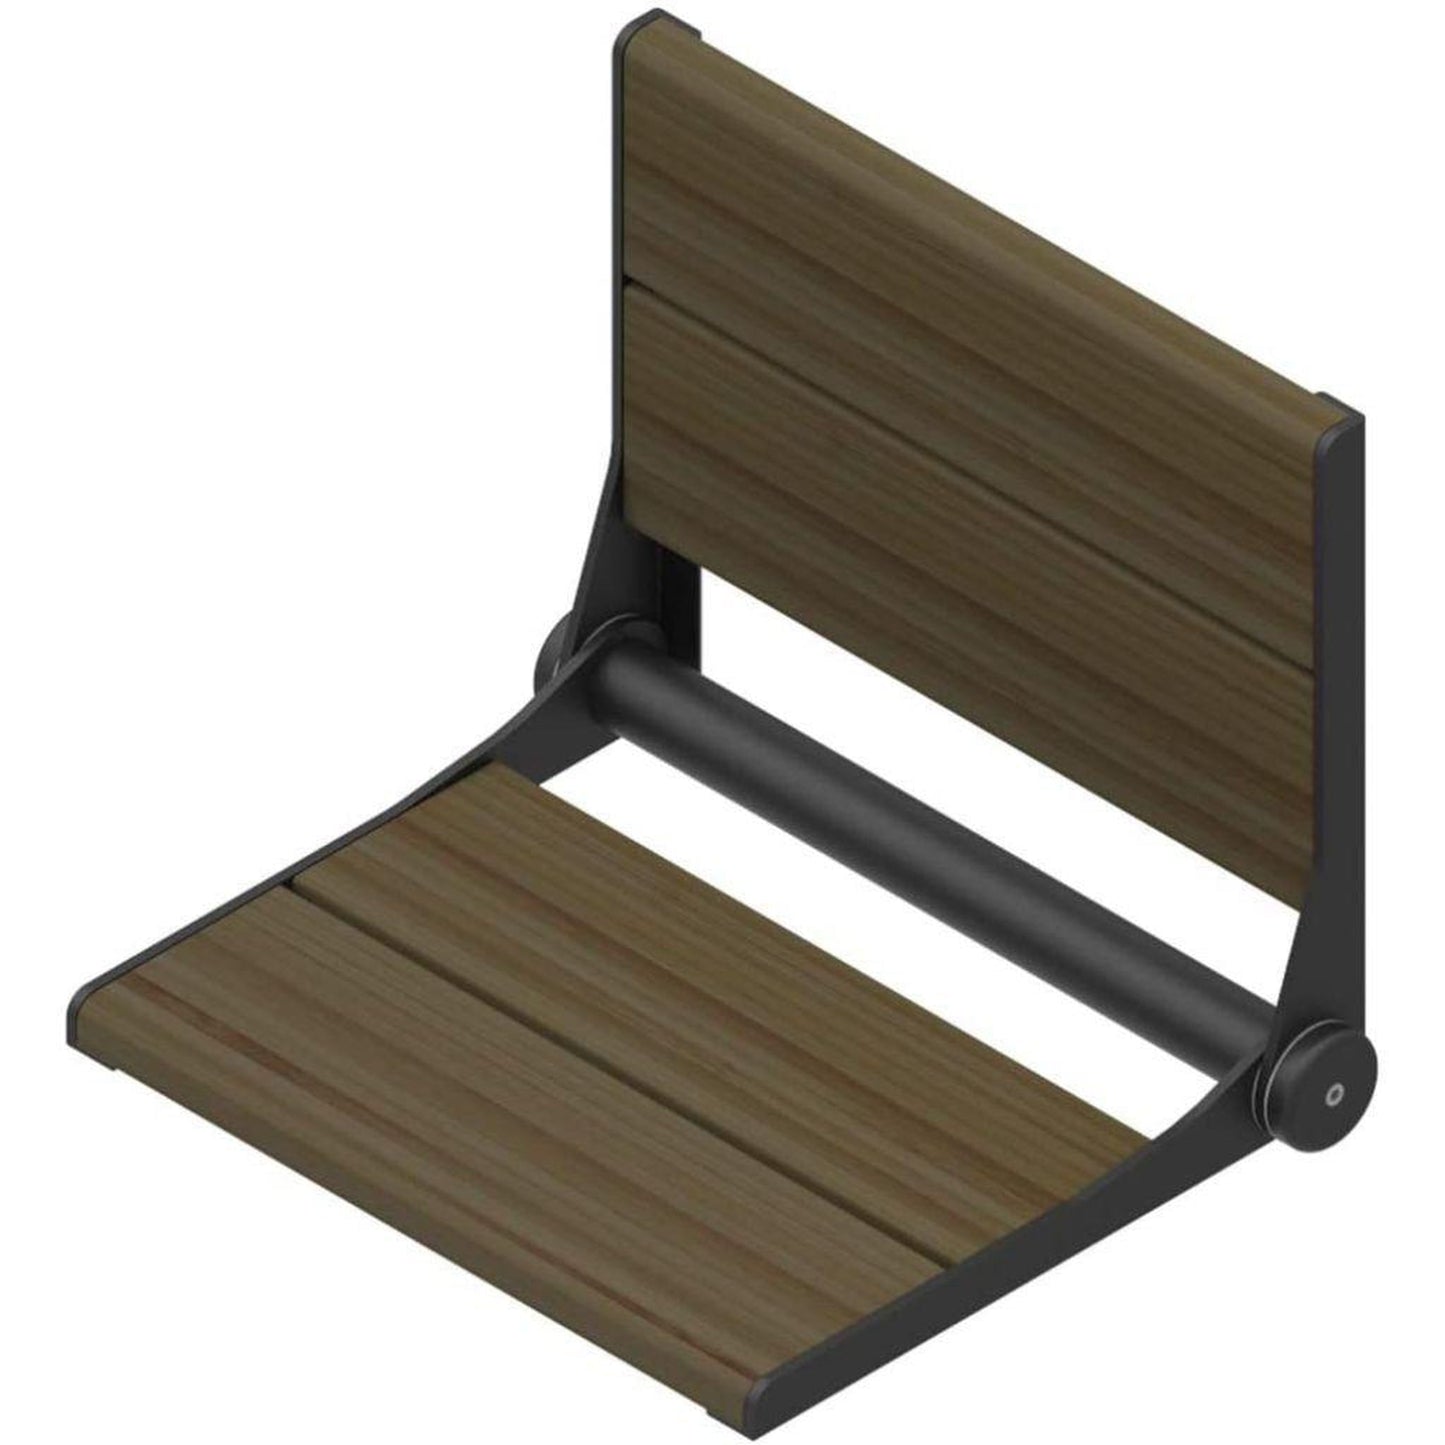 Invisia 18" Rectangle Ash Stained Bamboo Wall-Mounted SerenaSeat Fold Down Shower Seat With Matte Black Frame